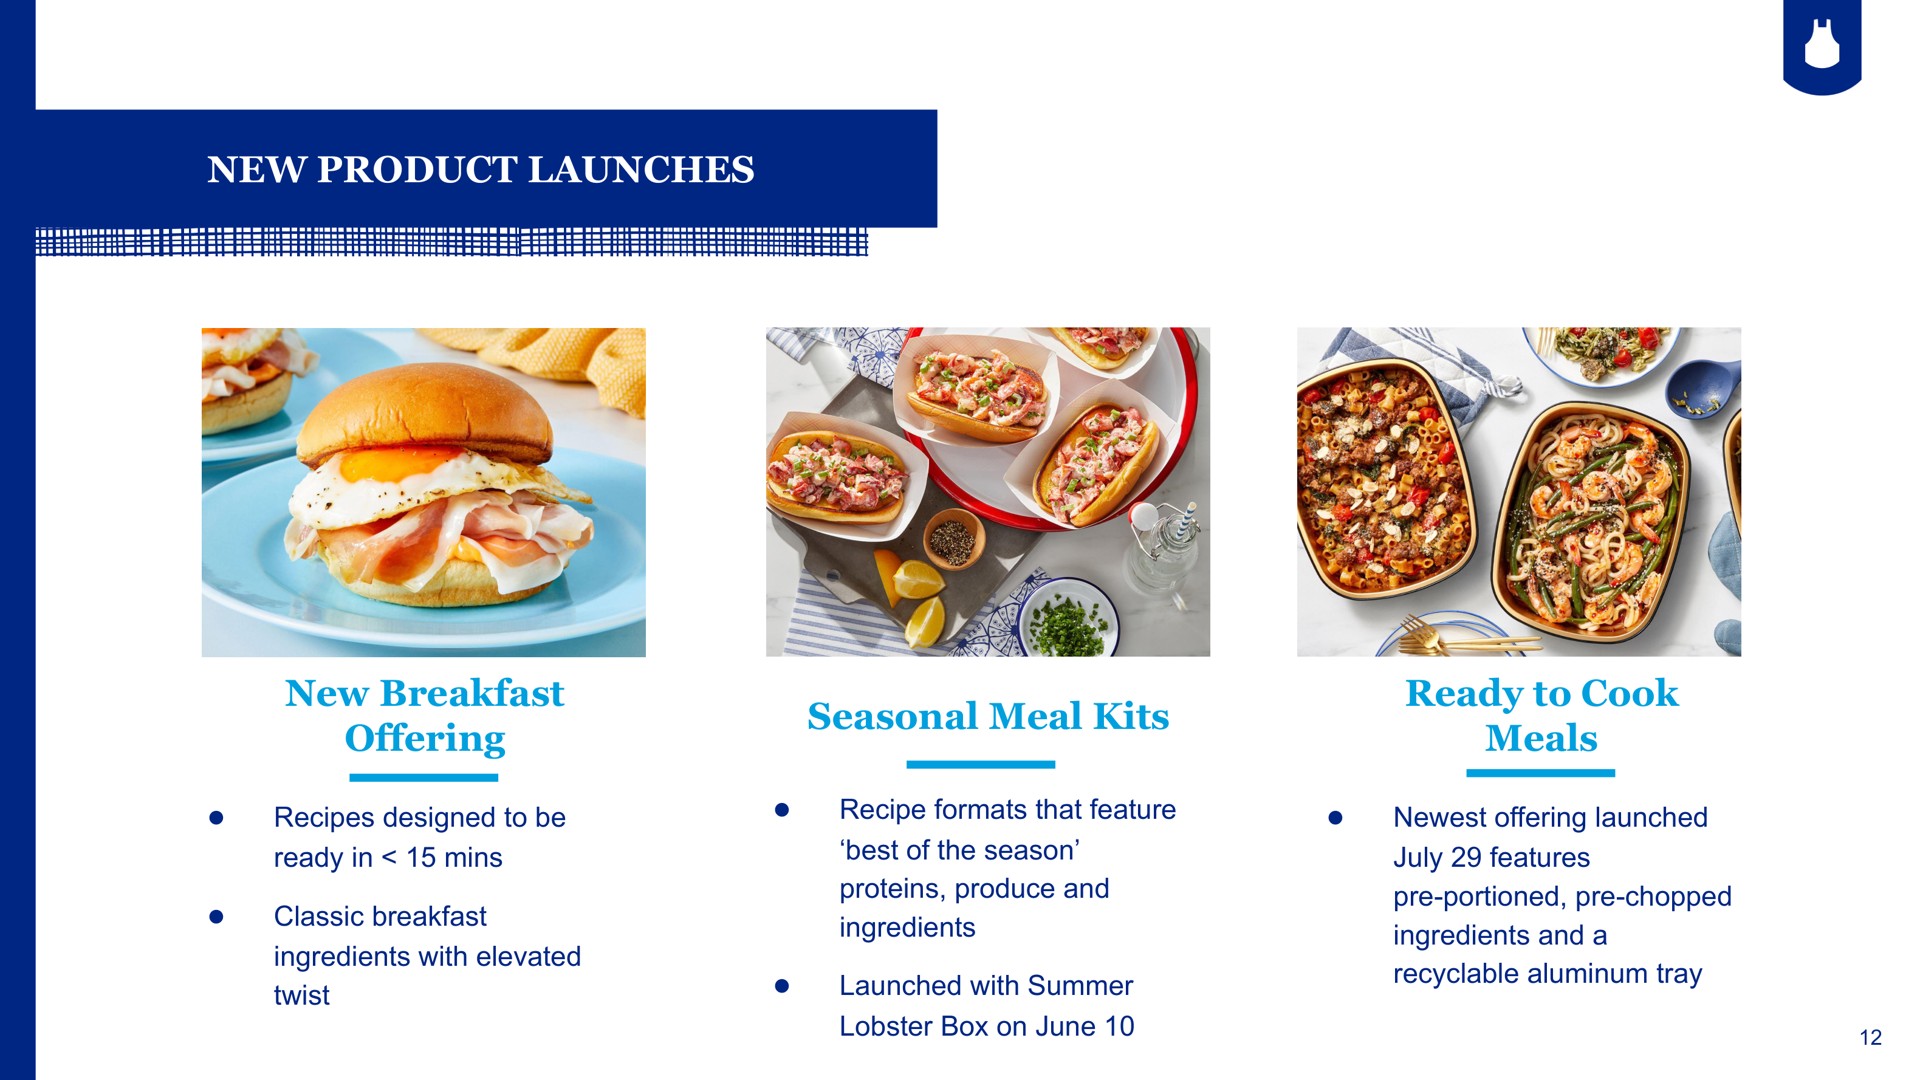 new product launches new breakfast offering recipes designed to be ready in mins classic breakfast ingredients with elevated twist seasonal meal kits recipe formats that feature best of the season proteins produce and ingredients launched with summer lobster box on june ready to cook meals offering launched features portioned chopped ingredients and a aluminum tray | Blue Apron